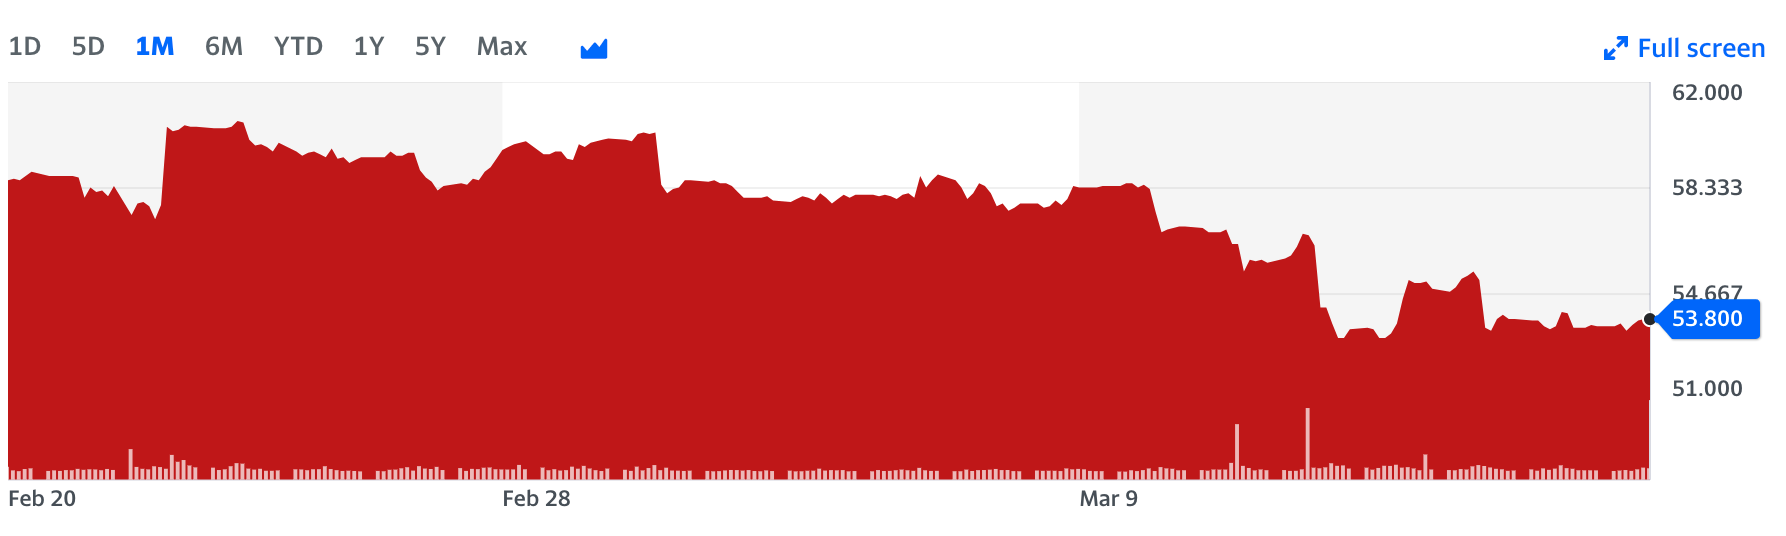 HSBC's stock price experienced a decline following the SVB crisis.